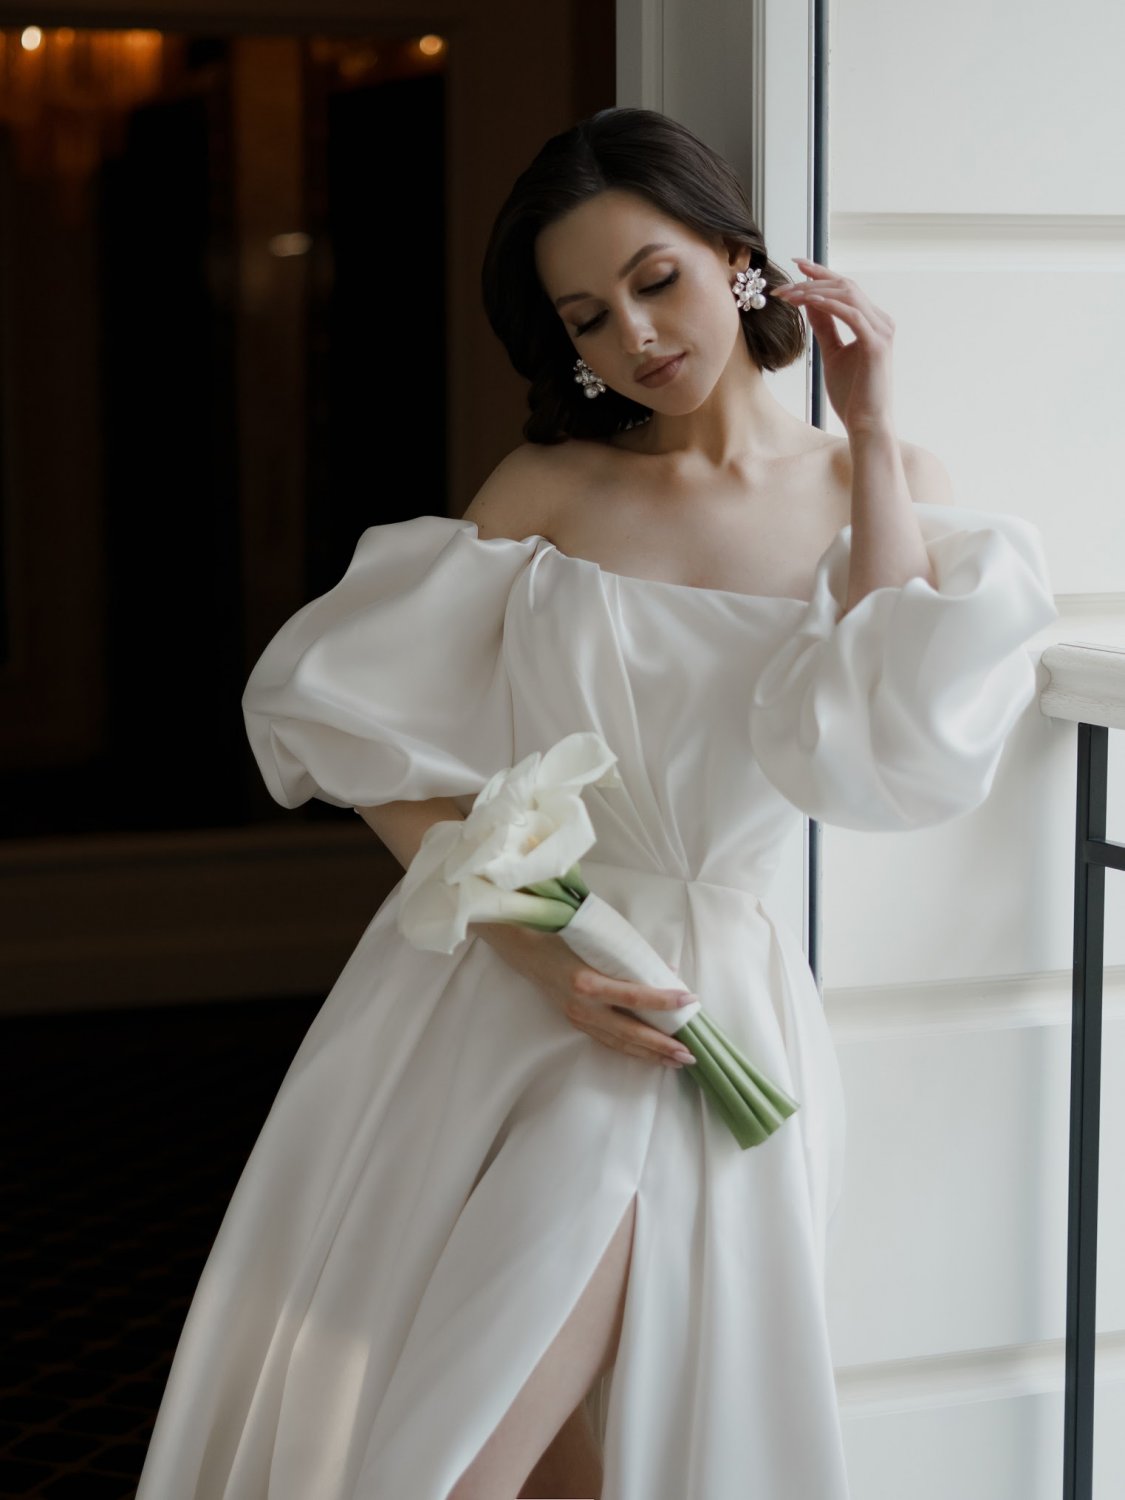 A-Line Sexy Wedding Dress Puff Sleeves Open Back Off-Shoulder Bride Gown